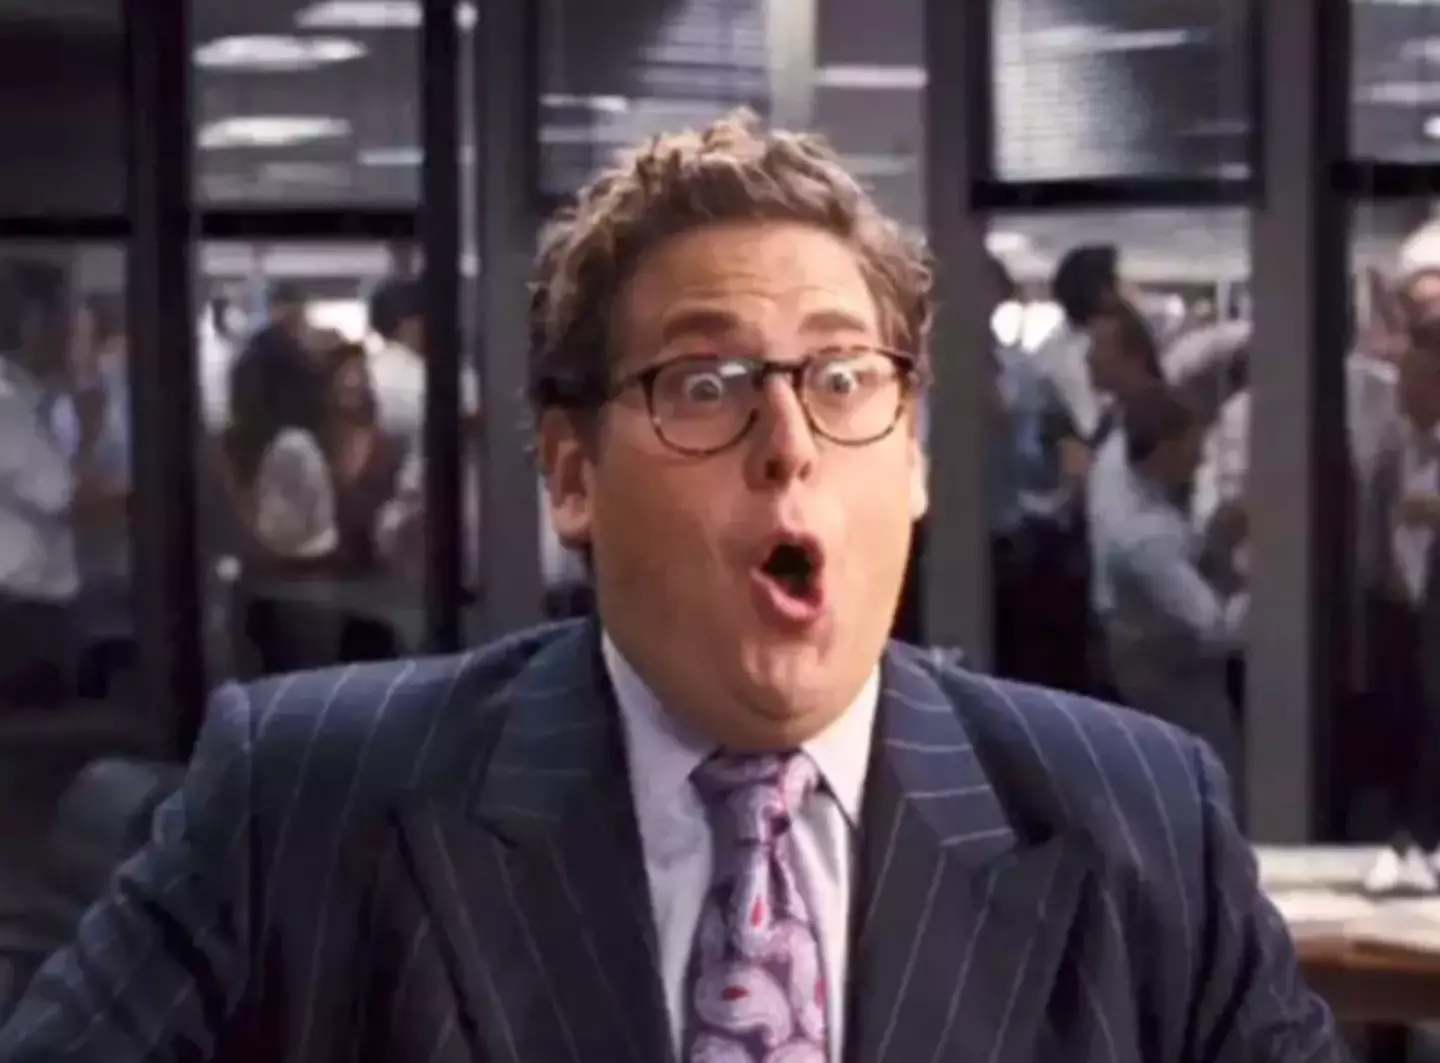 Jonah Hill's character used a lot of cocaine in Wolf of Wall Street.